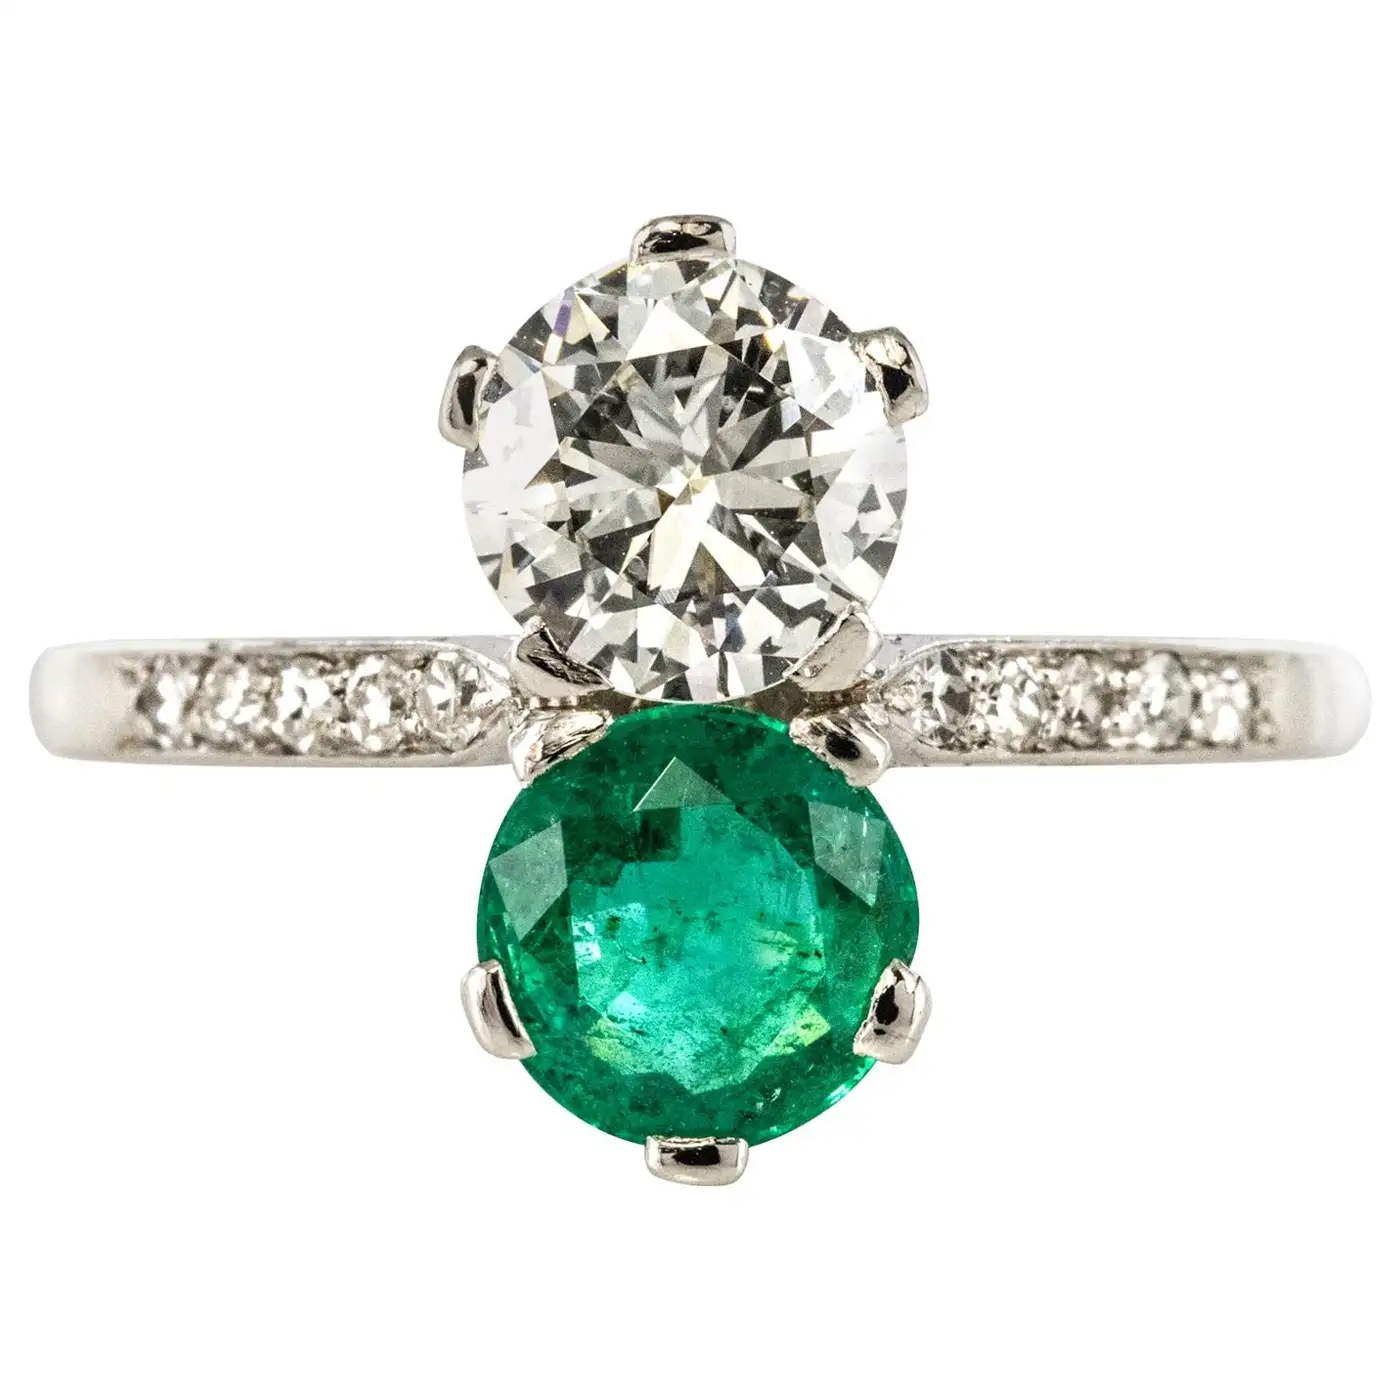 1930s-French-Platinum-Art-Deco-Emerald-Diamond-You-and-Me-Ring-7.webp